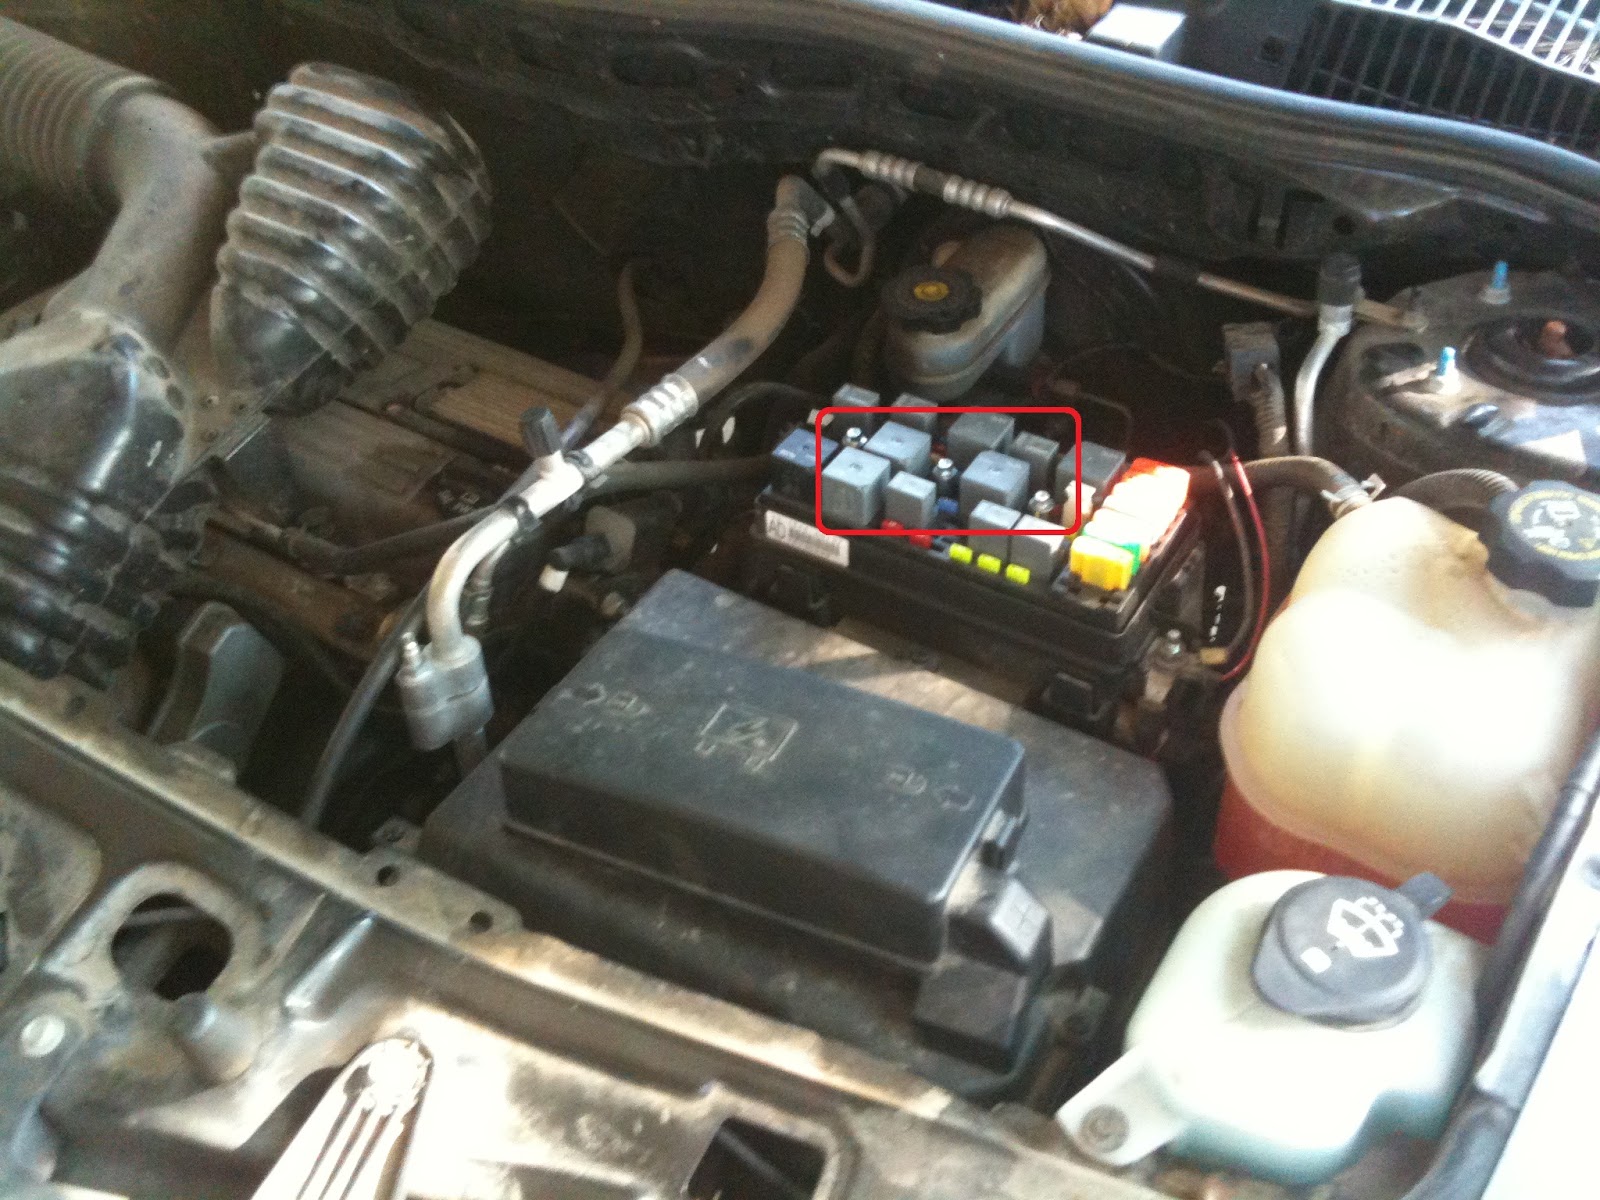 Nick's Project Blog: 2007 Saturn Vue won't start -OR- How ... 2003 saturn vue fuse box cover 